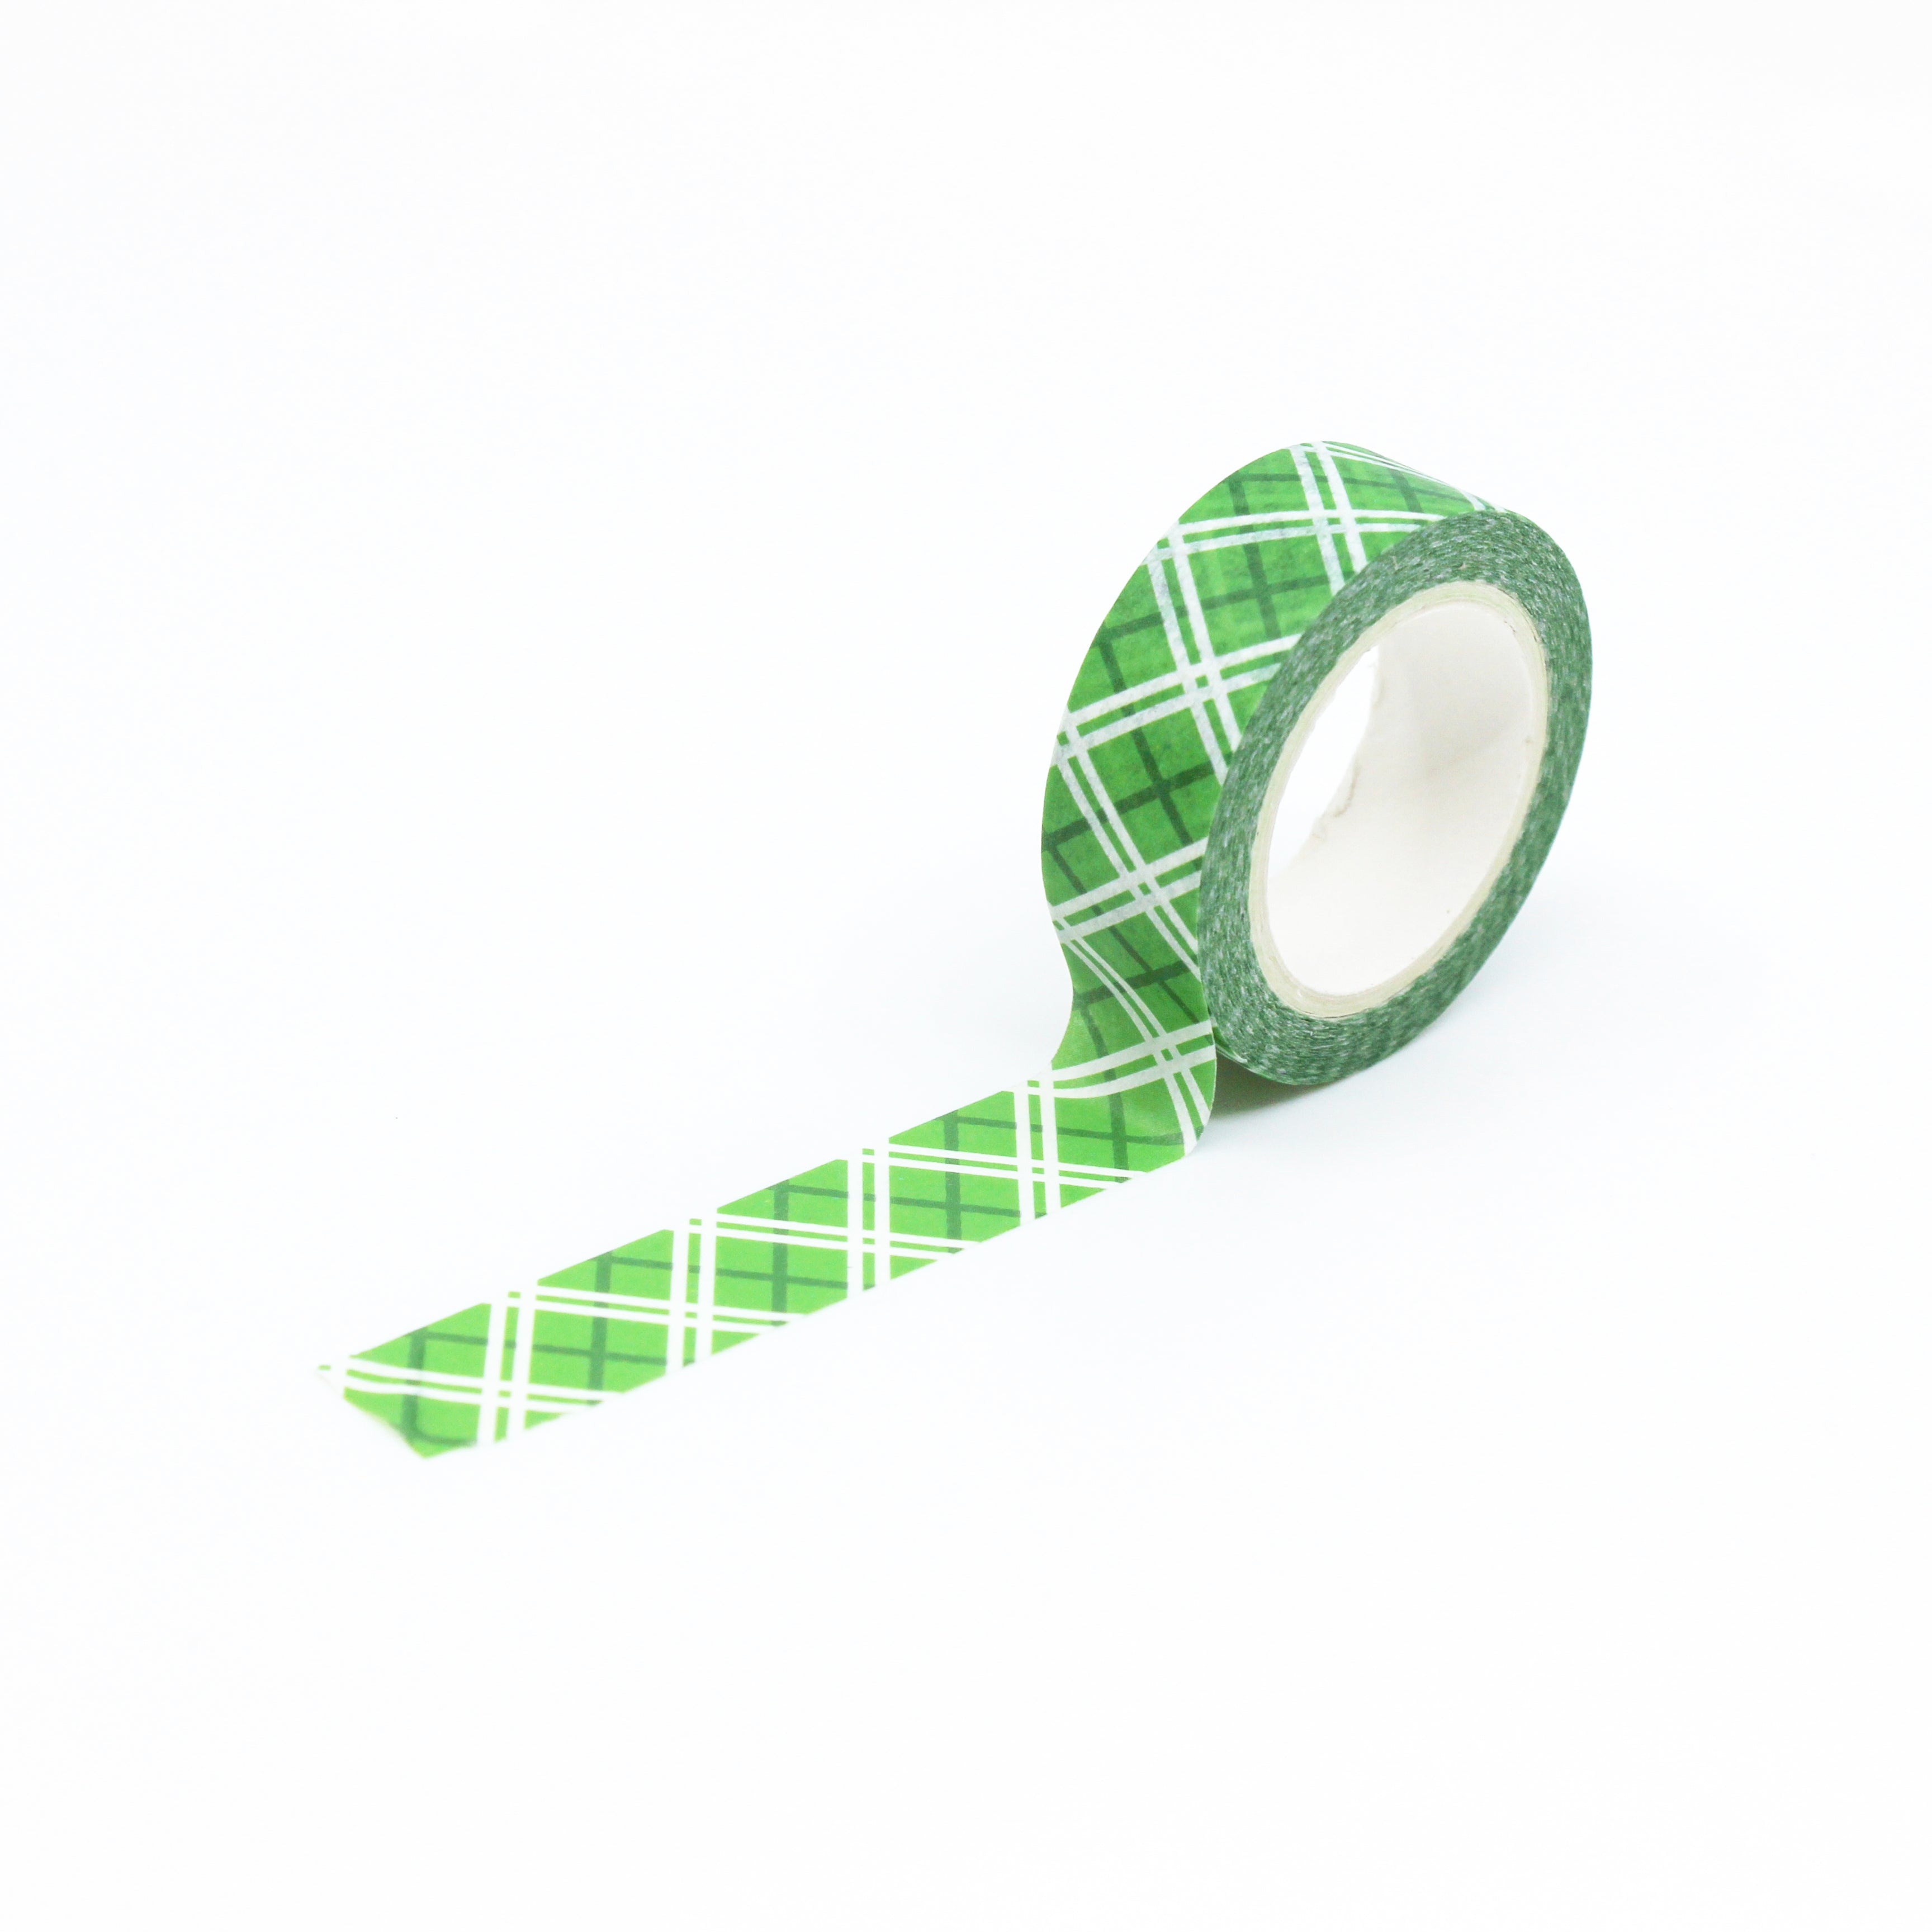 This festive green plaid is perfect for craft projects and spreads throughout the year. It's also perfect for holiday projects or even a father's day card to match his plaid ties and socks. This tape is sold at BBB Supplies Craft Shop.